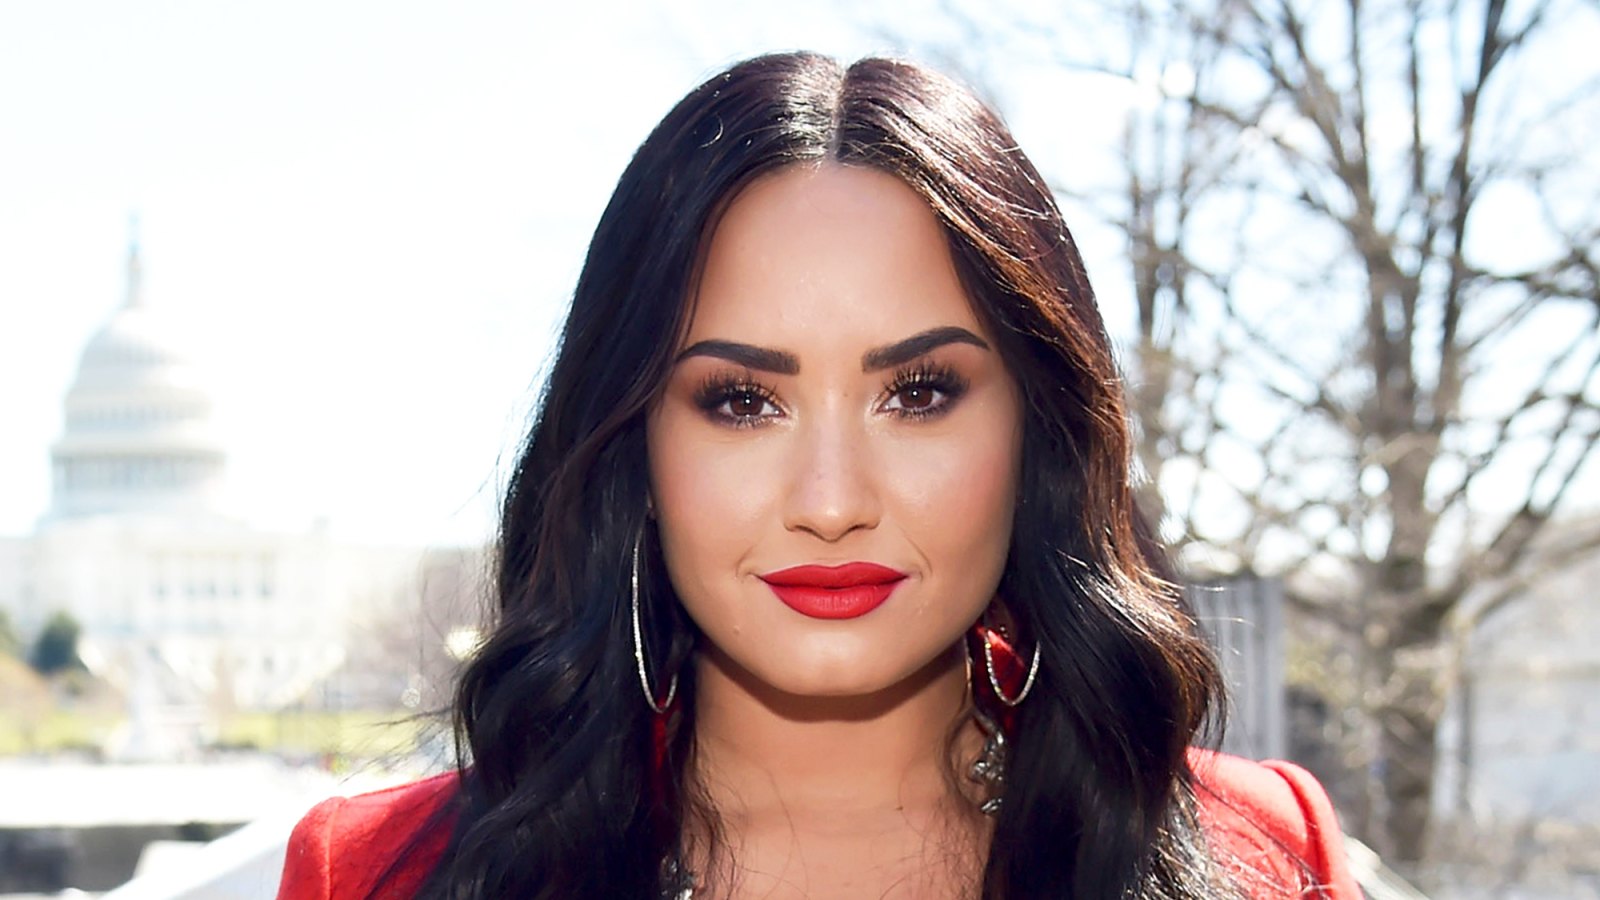 Demi Lovato attends March For Our Lives on March 24, 2018 in Washington, DC.